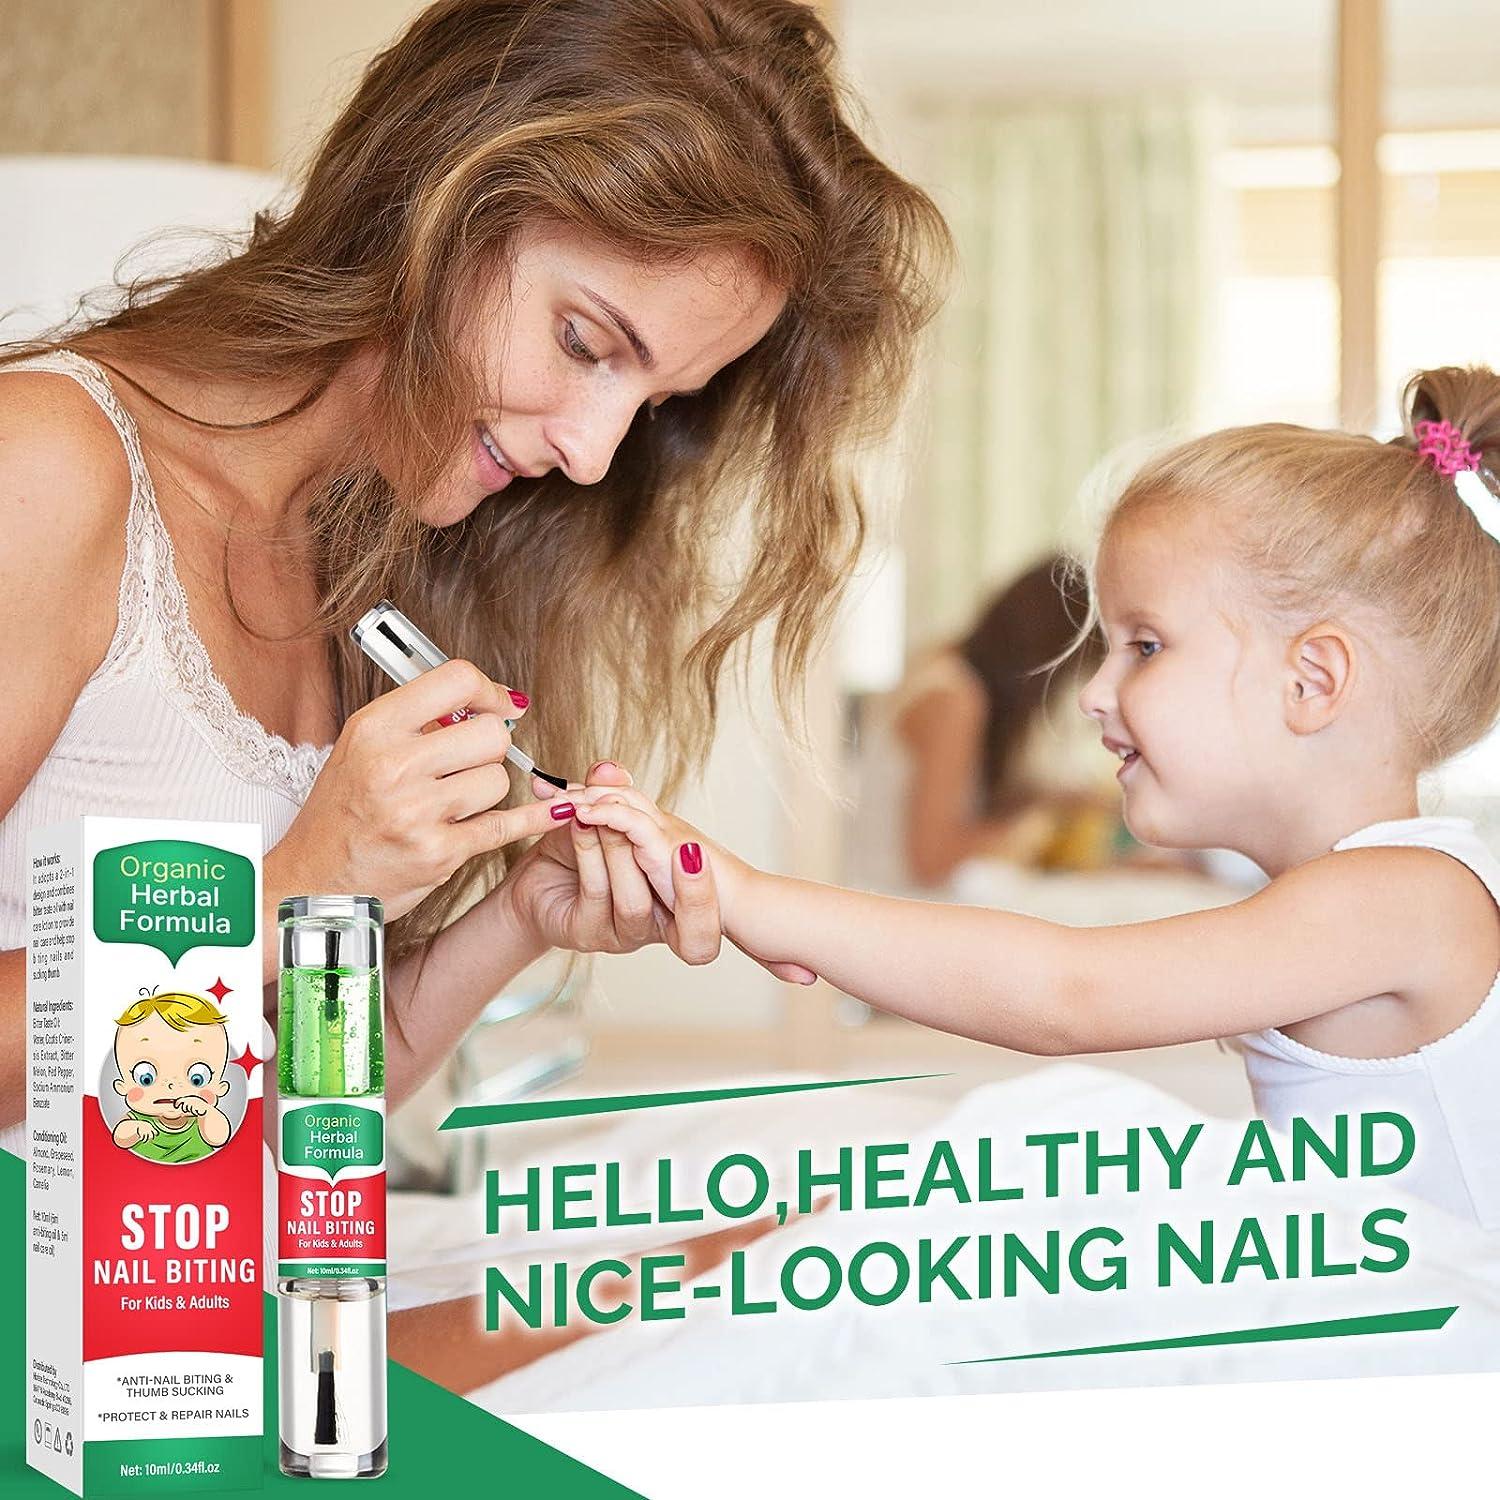 Nail-biting-treatment-for-kids Thumb-sucking-stop-for-kids Nail-biting-treatment-for-adults  Nail-care Bitter-taste Safe-natural-plant-extract Size 1pc | Fruugo SA